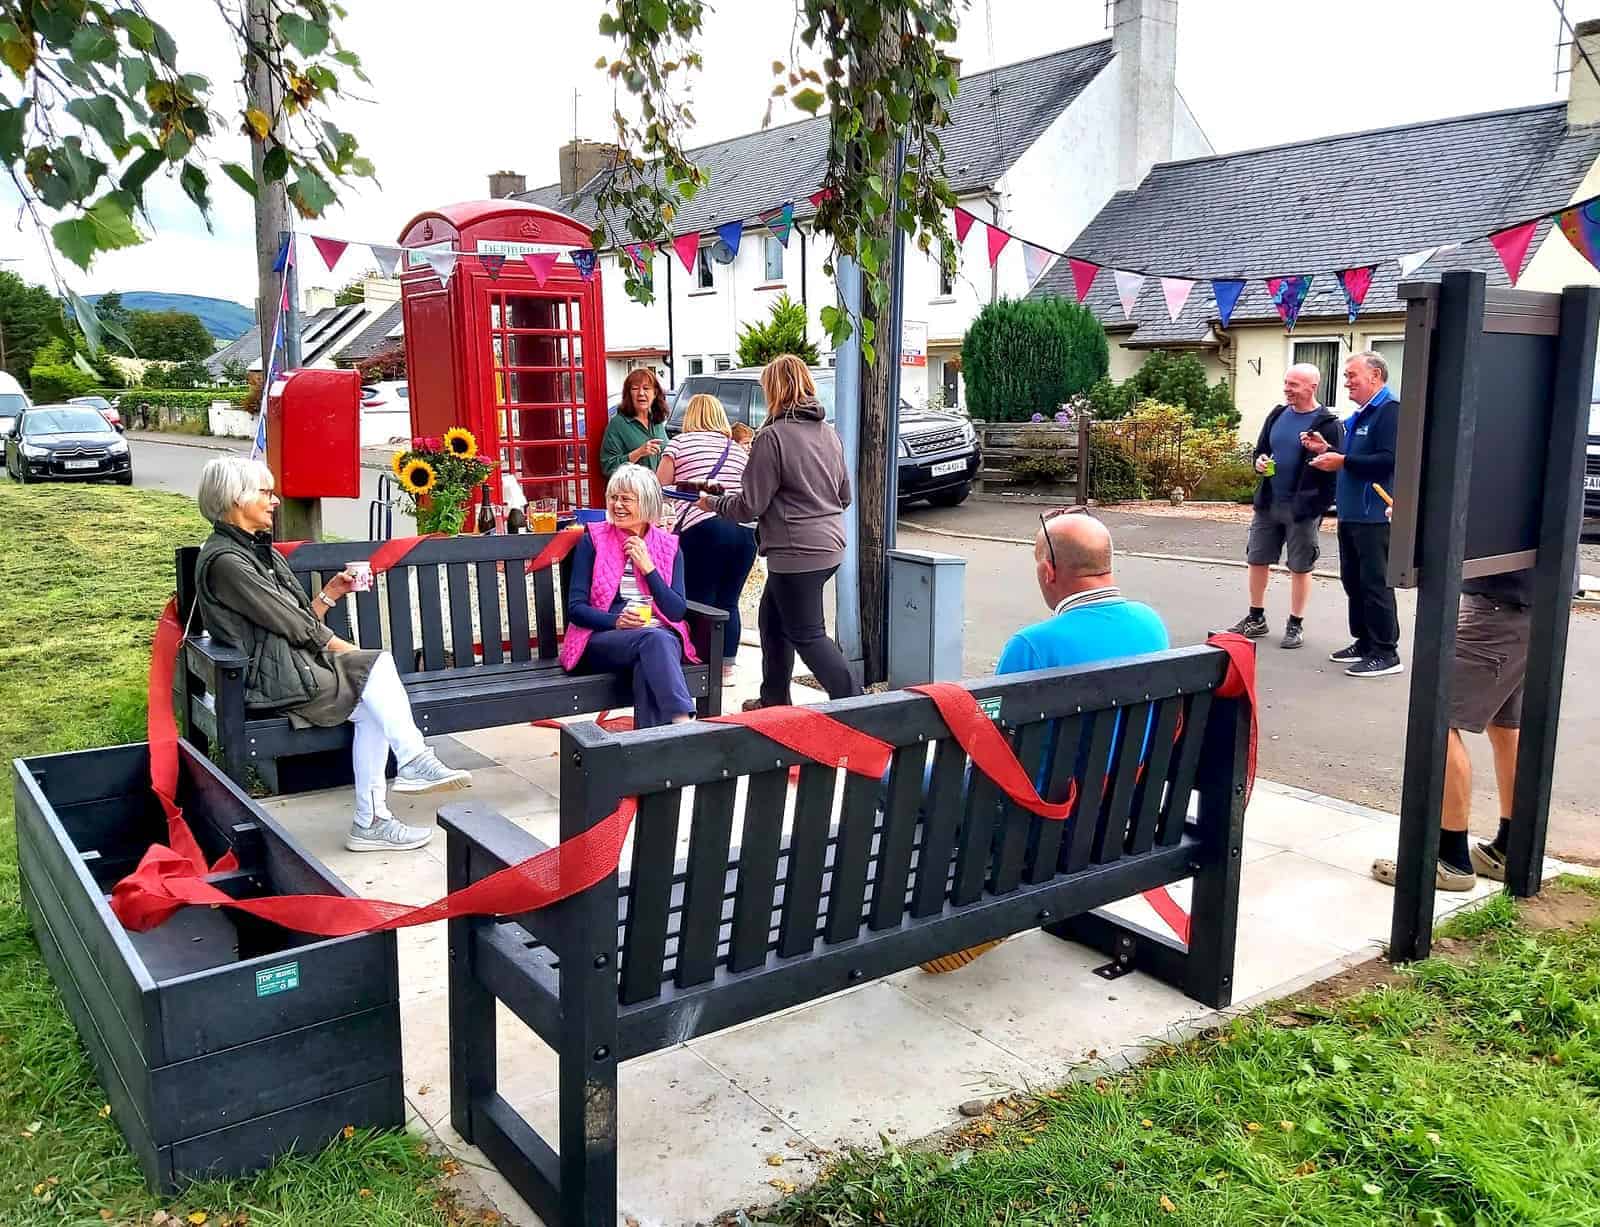 Abernethy Community Council TDP Dale Bench & Longwood Planter made from recycled plastic